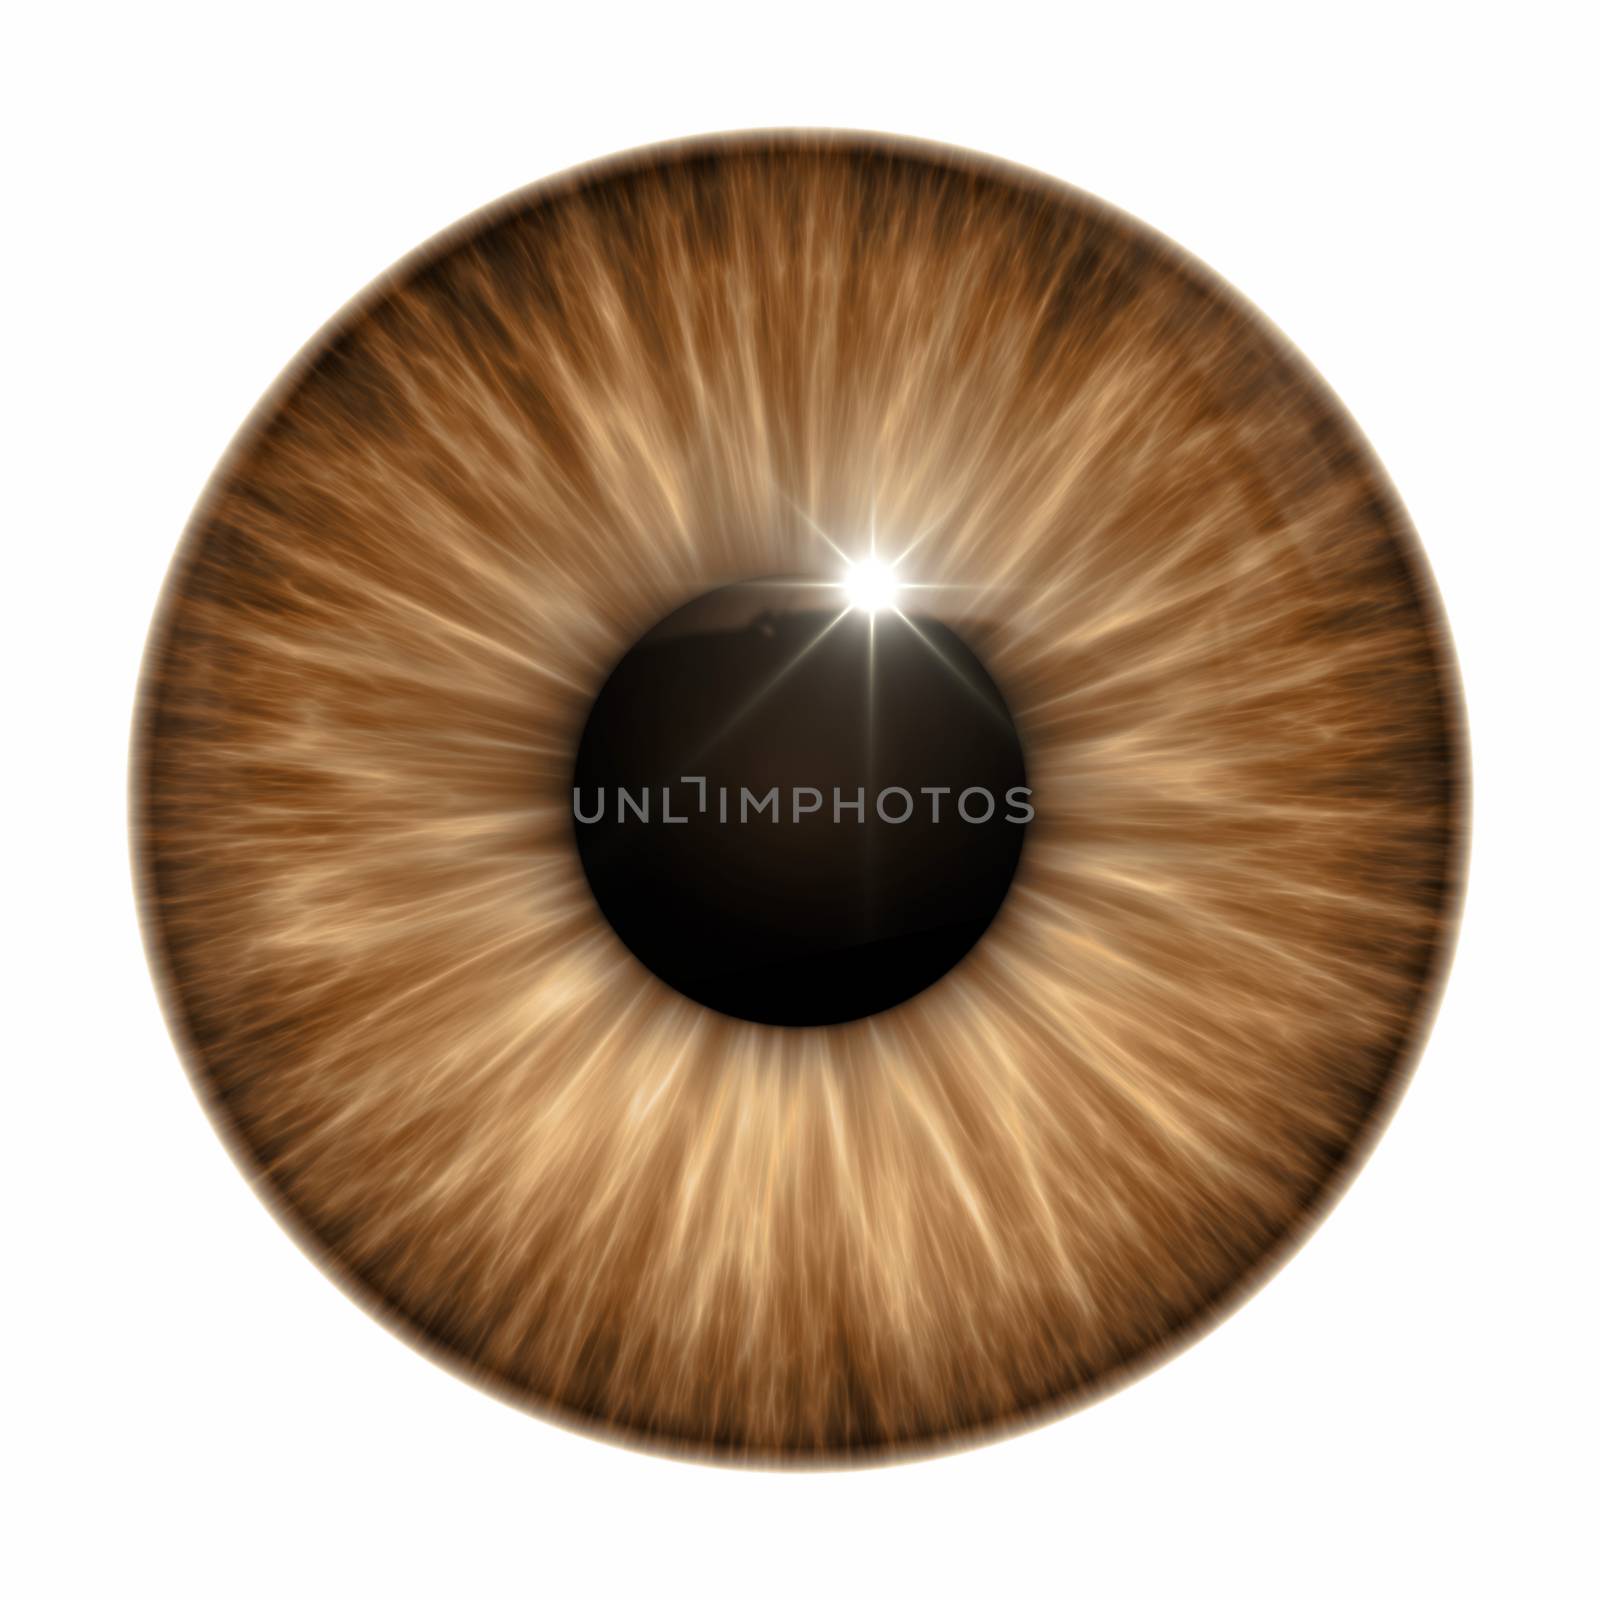 An image of a nice brown eye texture